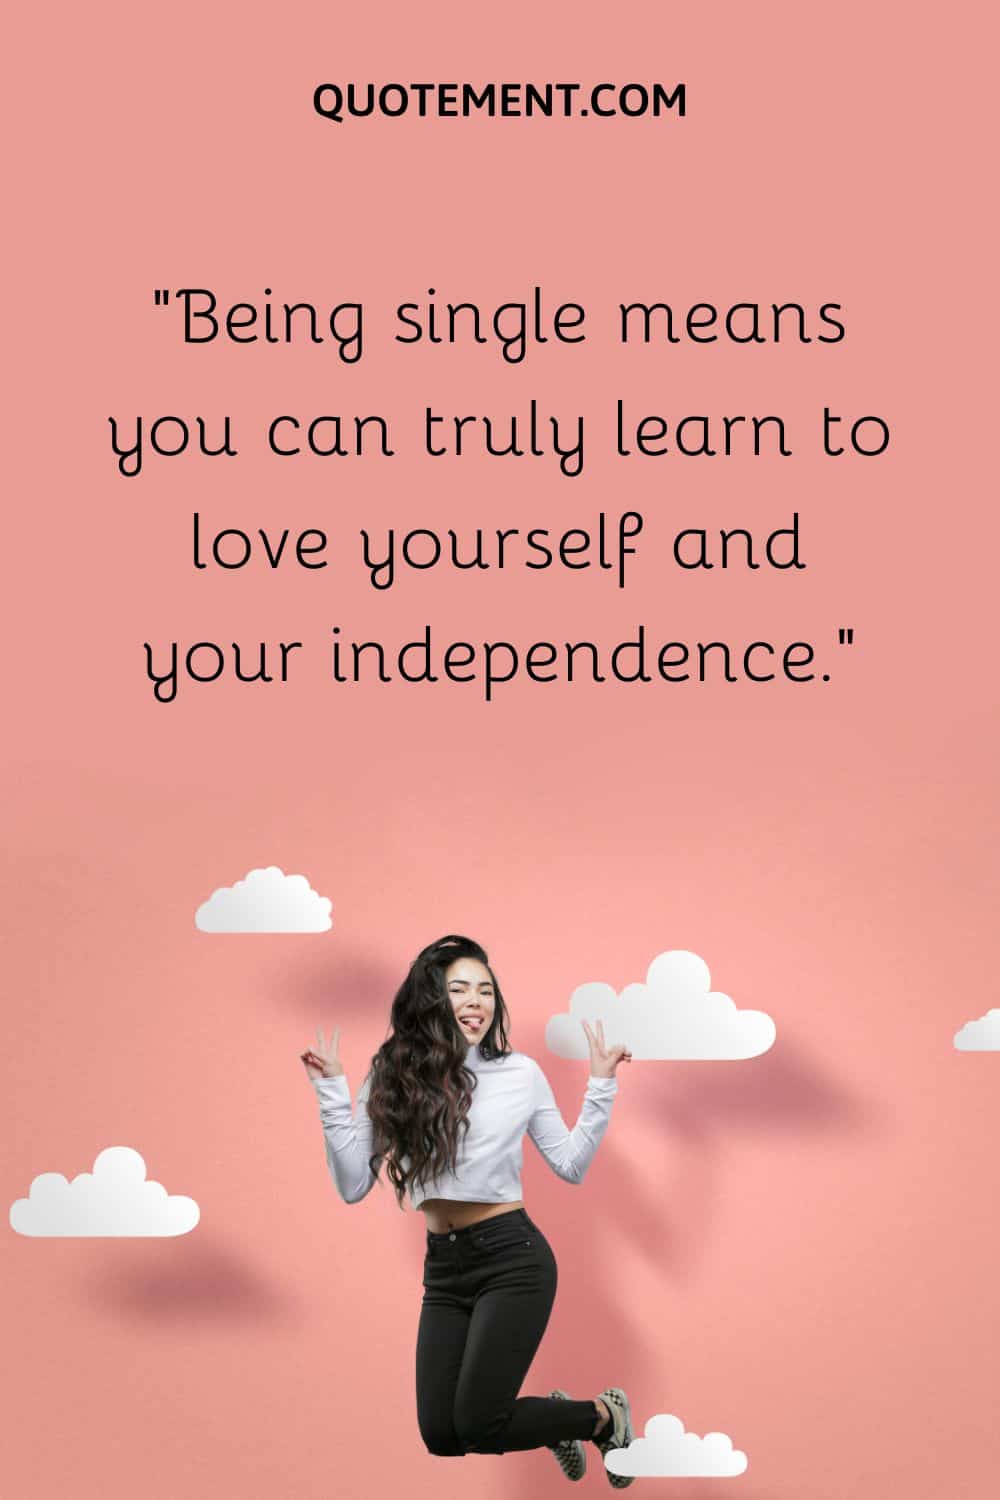 Being single means you can truly learn to love yourself and your independence